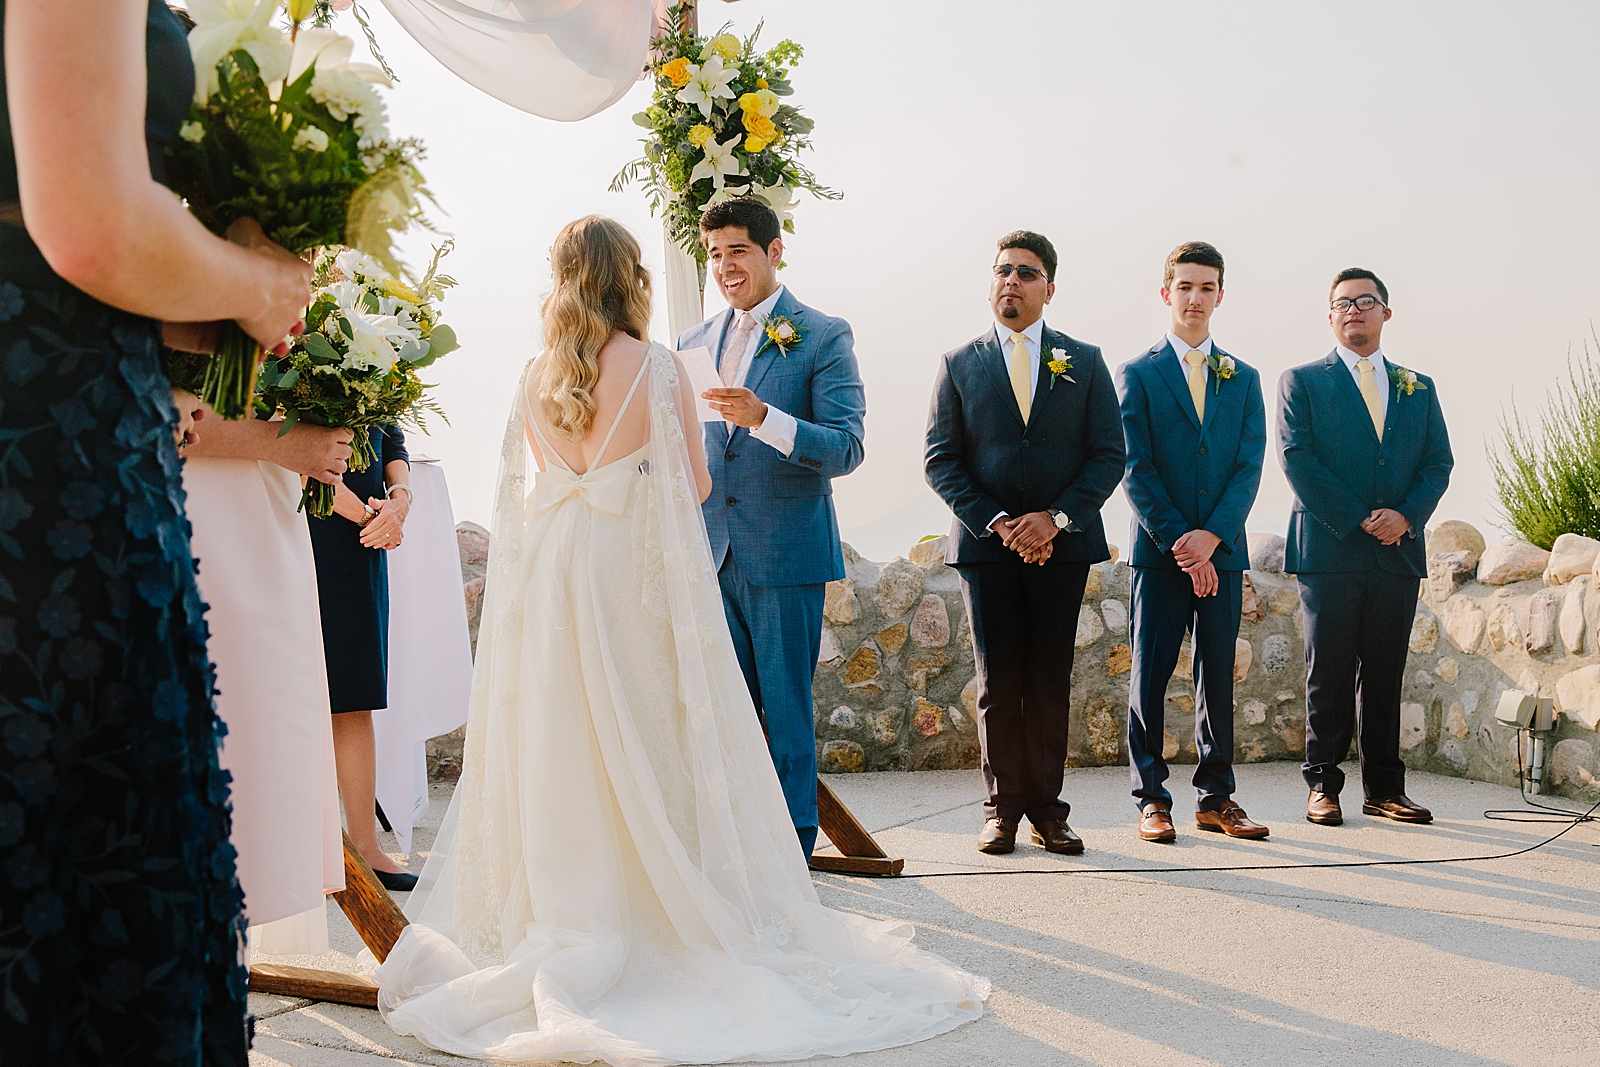 groom reading his wedding vows at his outdoor wedding with his groomsmen standing behind him